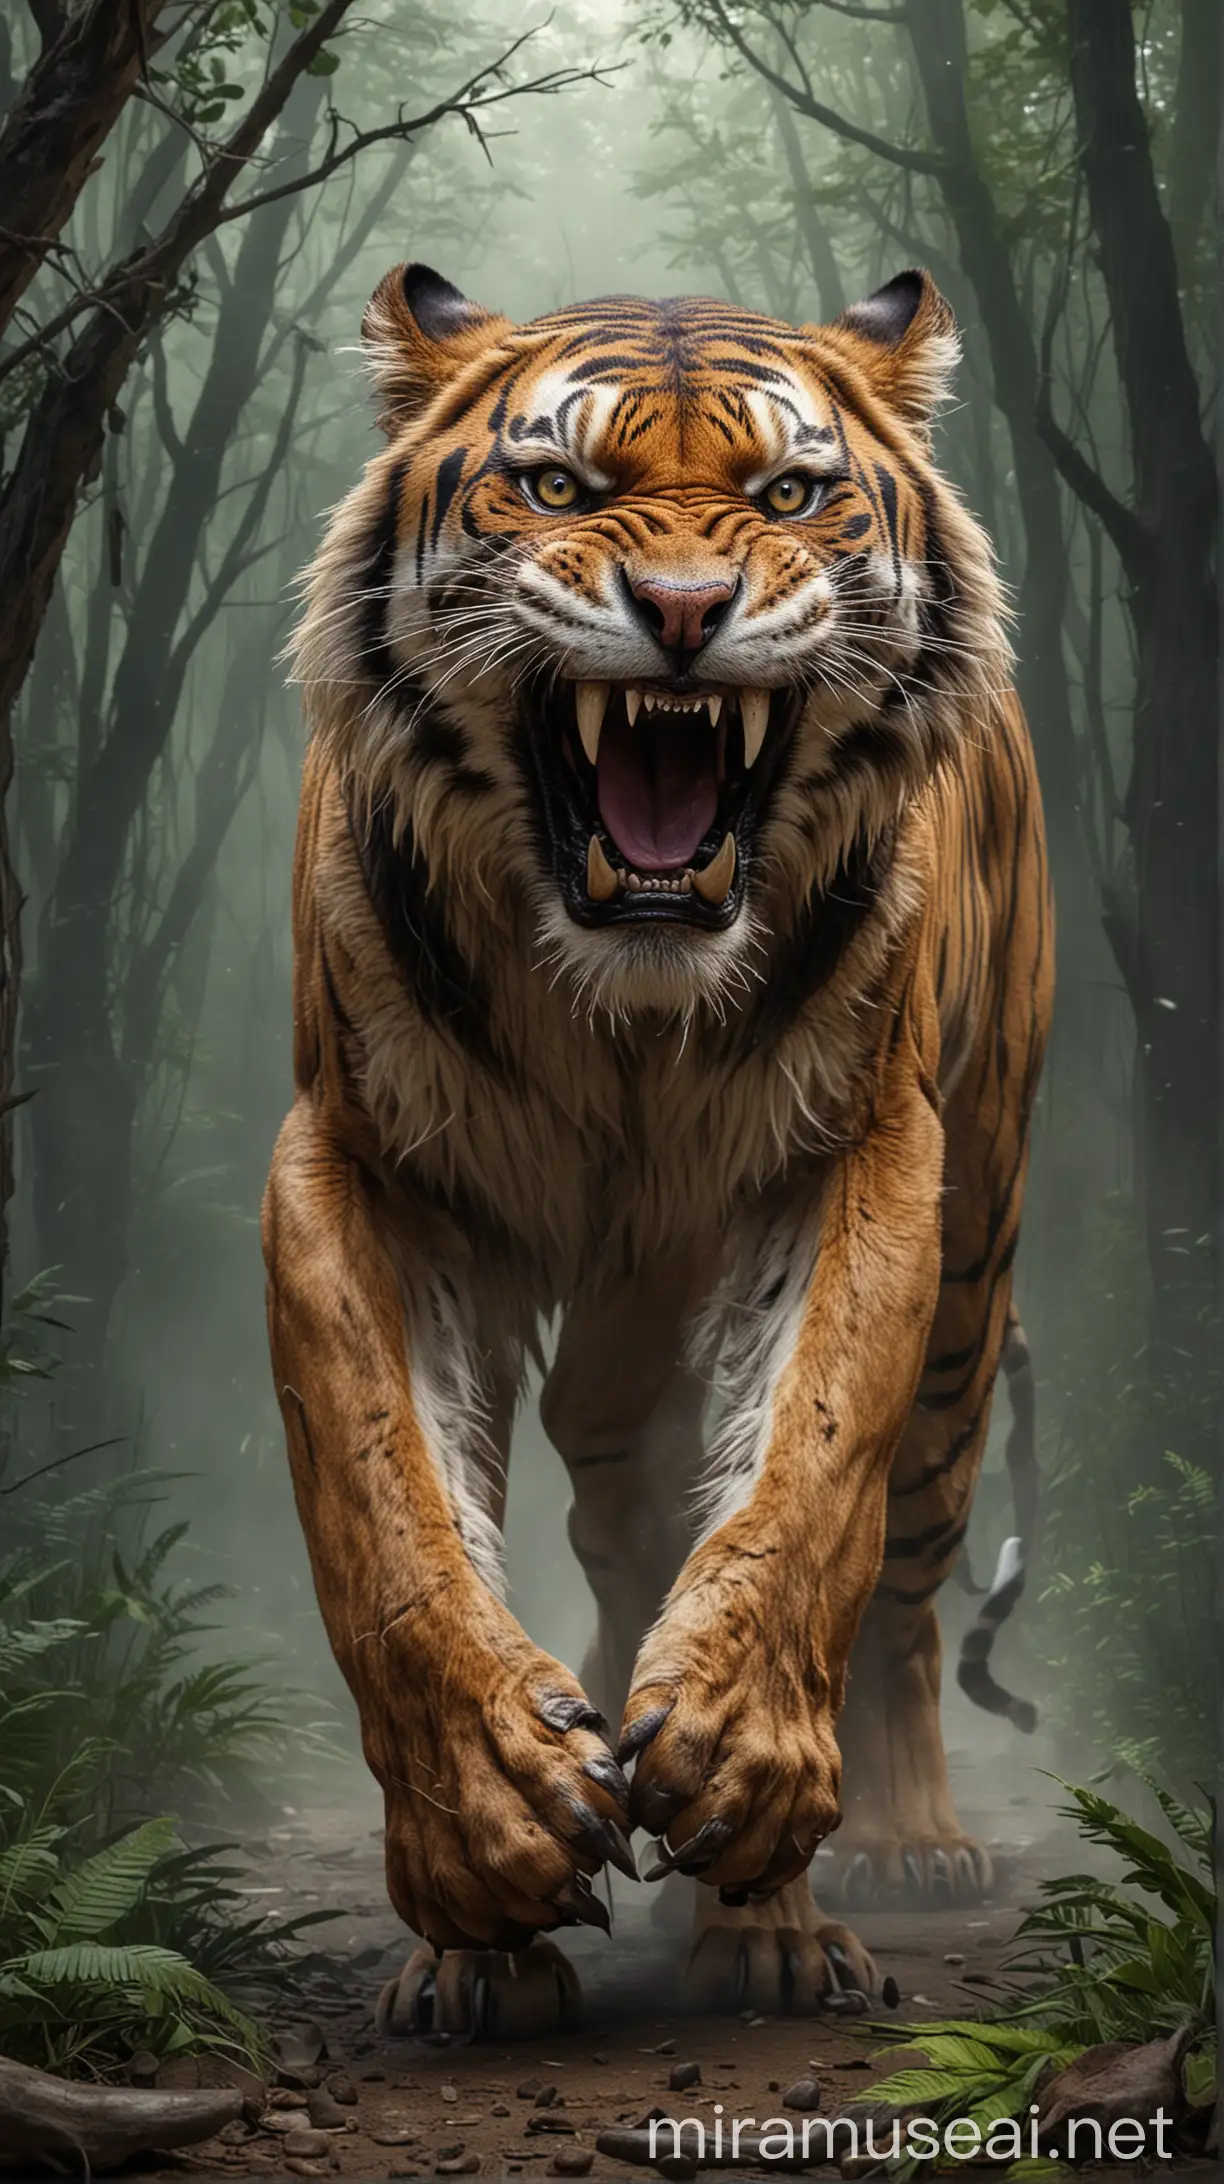 Fierce SaberToothed Tiger Roaring in the Wilderness